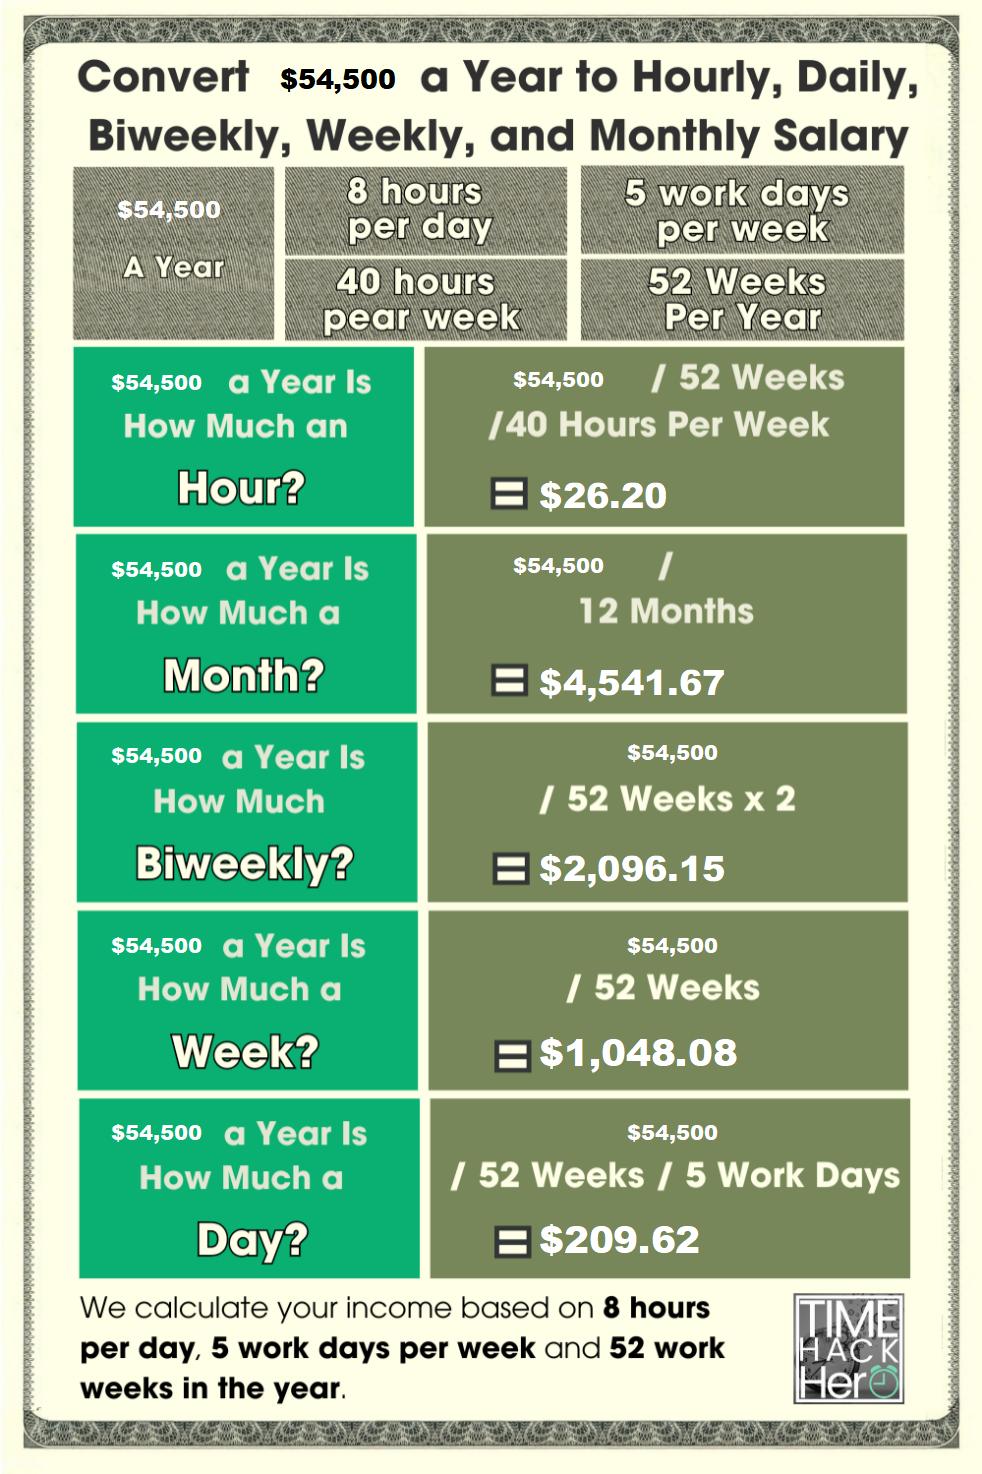 Convert $54500 a Year to Hourly, Daily, Biweekly, Weekly, and Monthly Salary